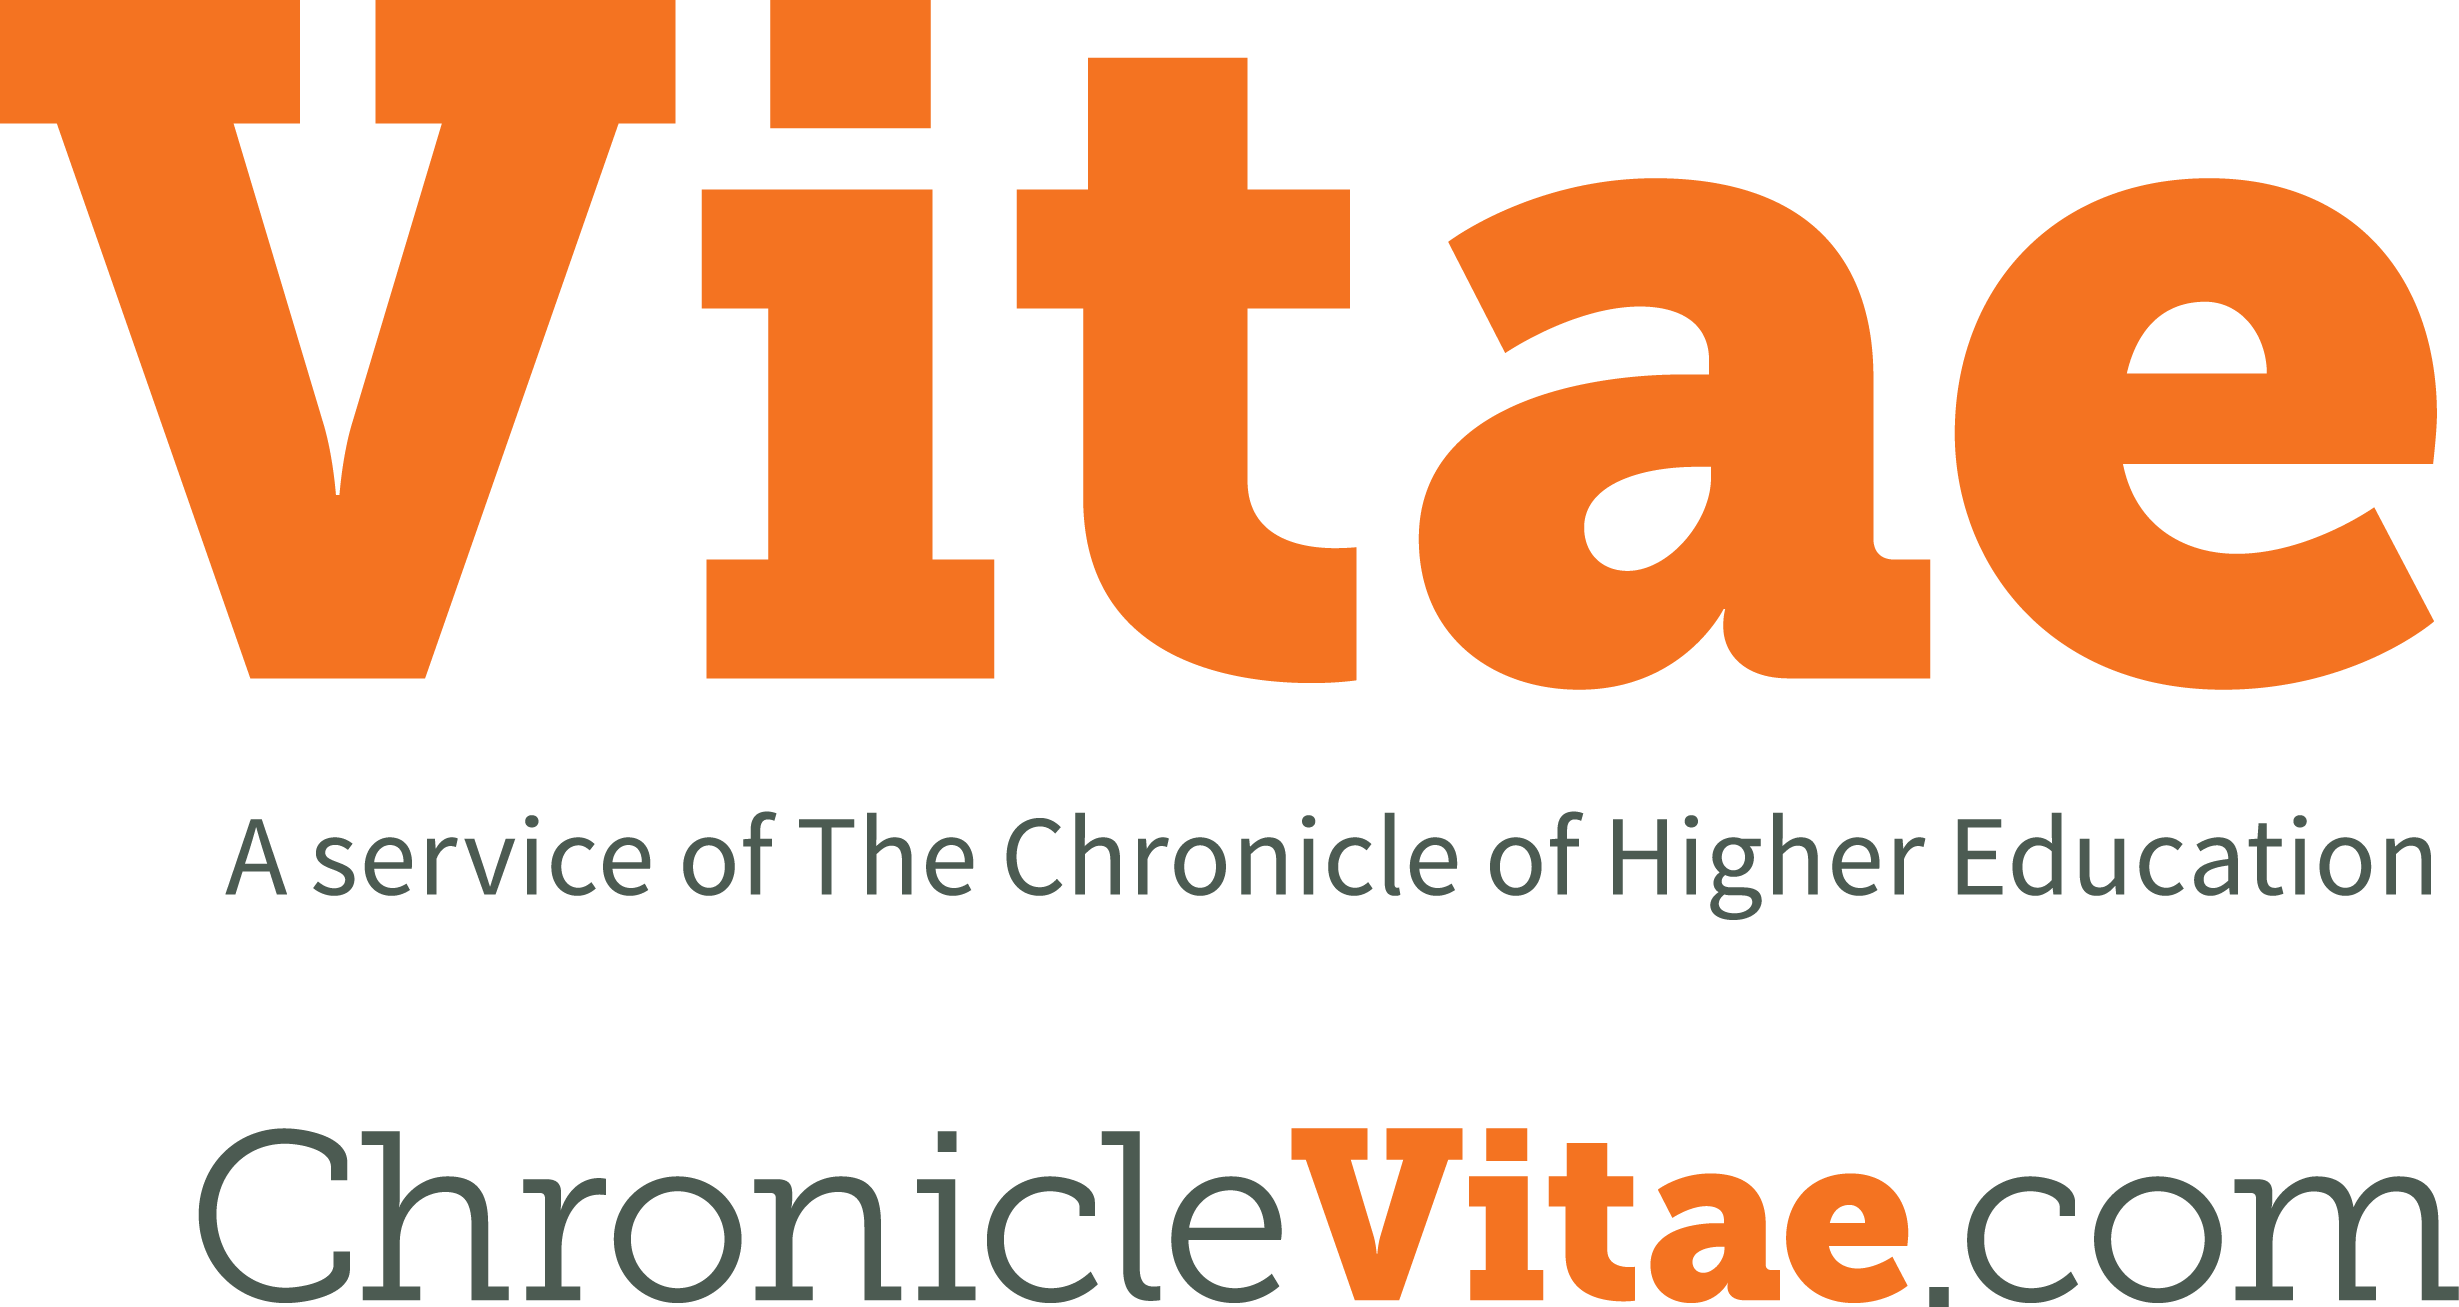 the chronicle of higher education launches powerful new job candidate search tool through vitae